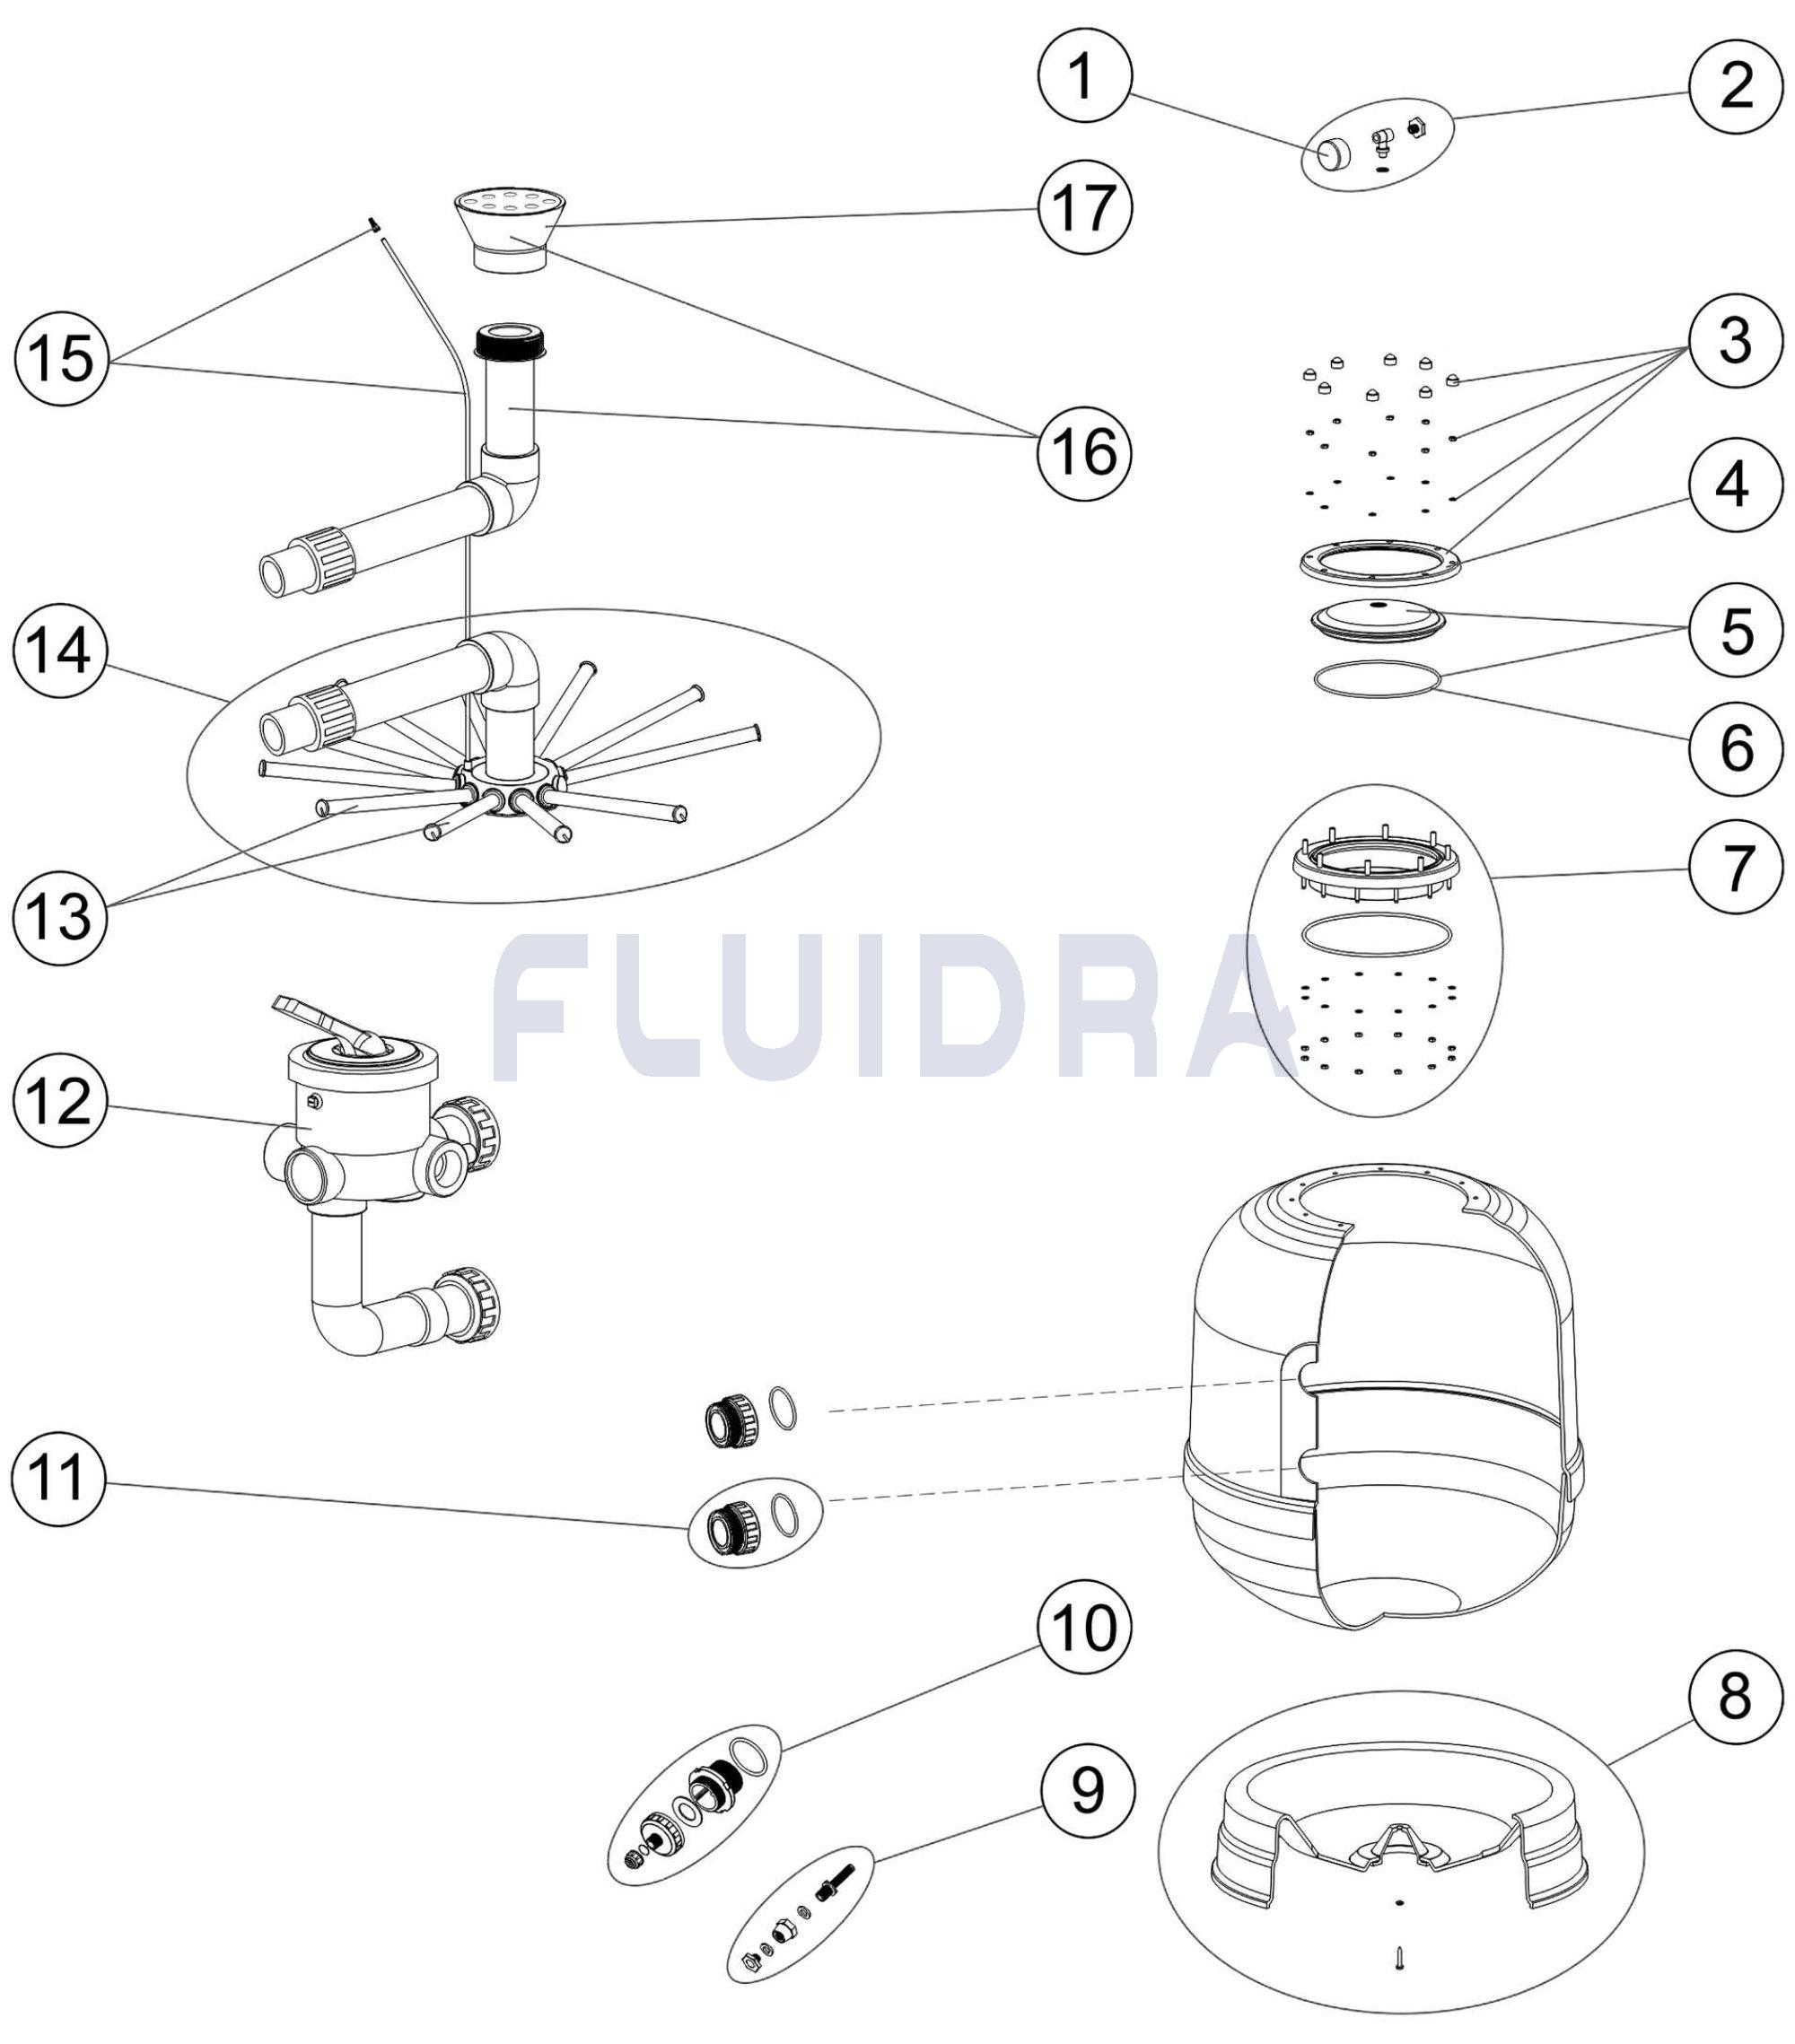 https://spareparts.astralpool.com/en/exploded-view.php?producto=WF000096